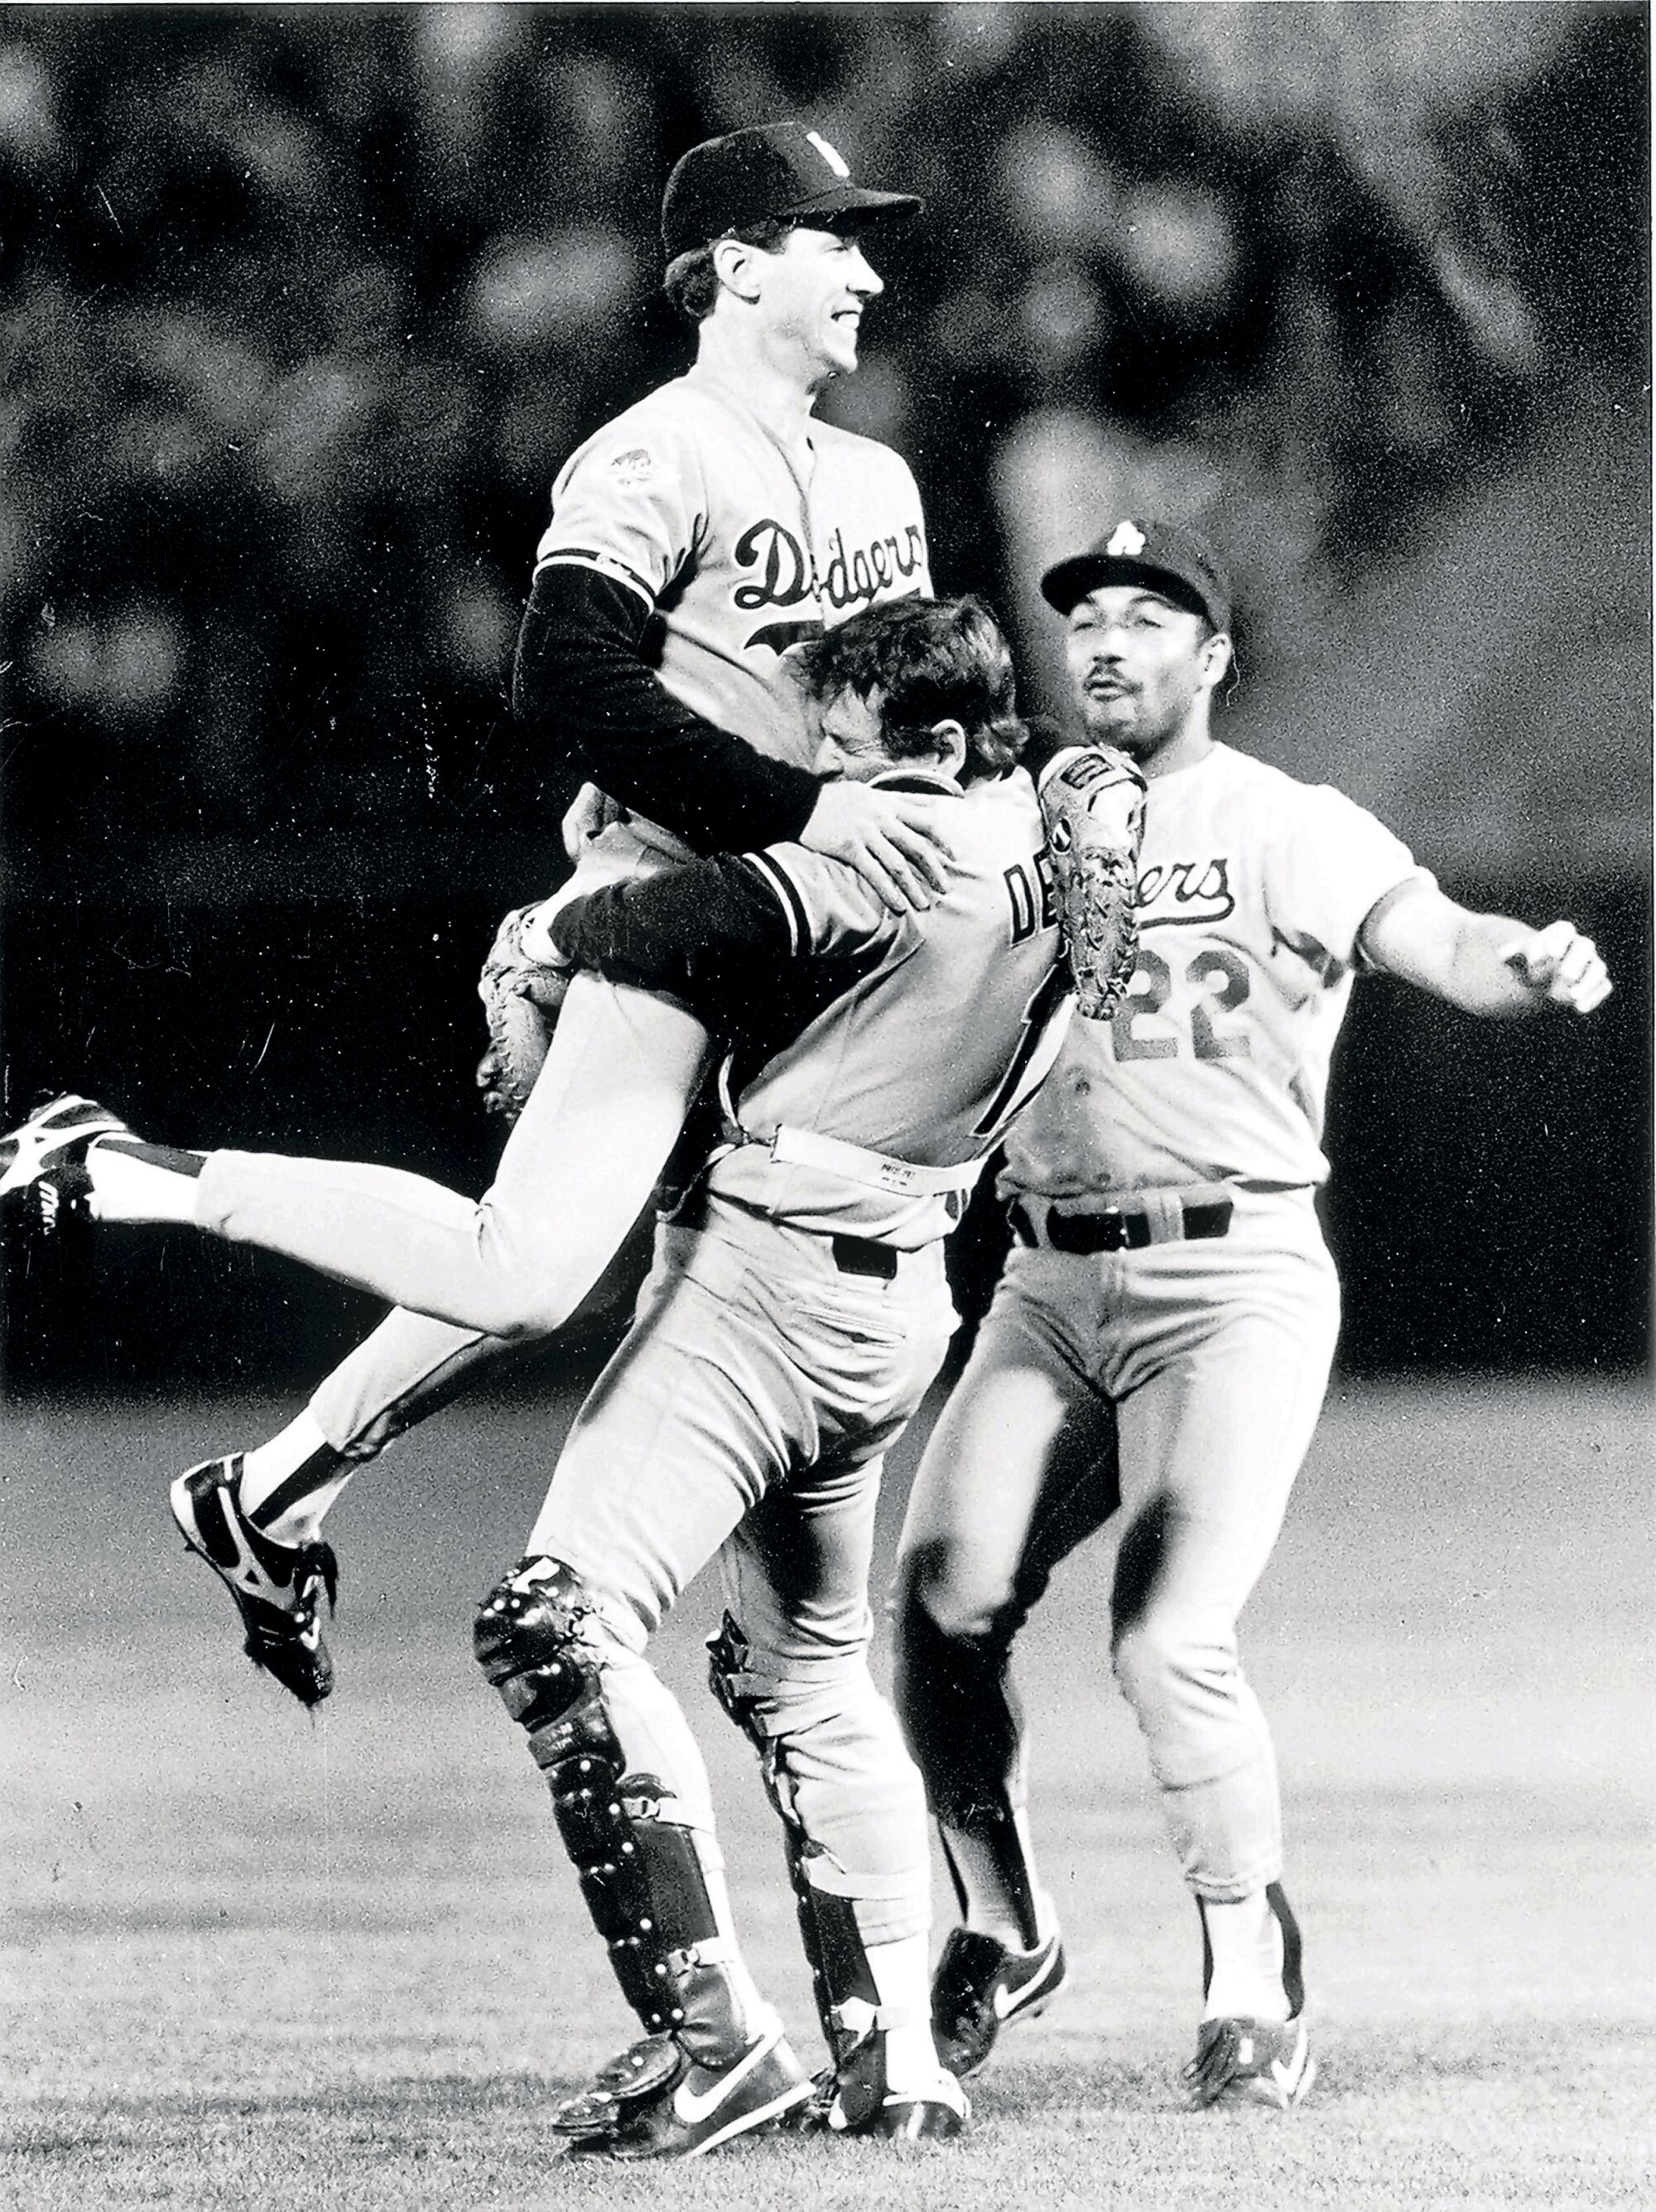 Rick Dempsey lifts Orel Hershiser in celebration at the conclusion of the 1988 World Series. Franklin Stubbs is on the right.